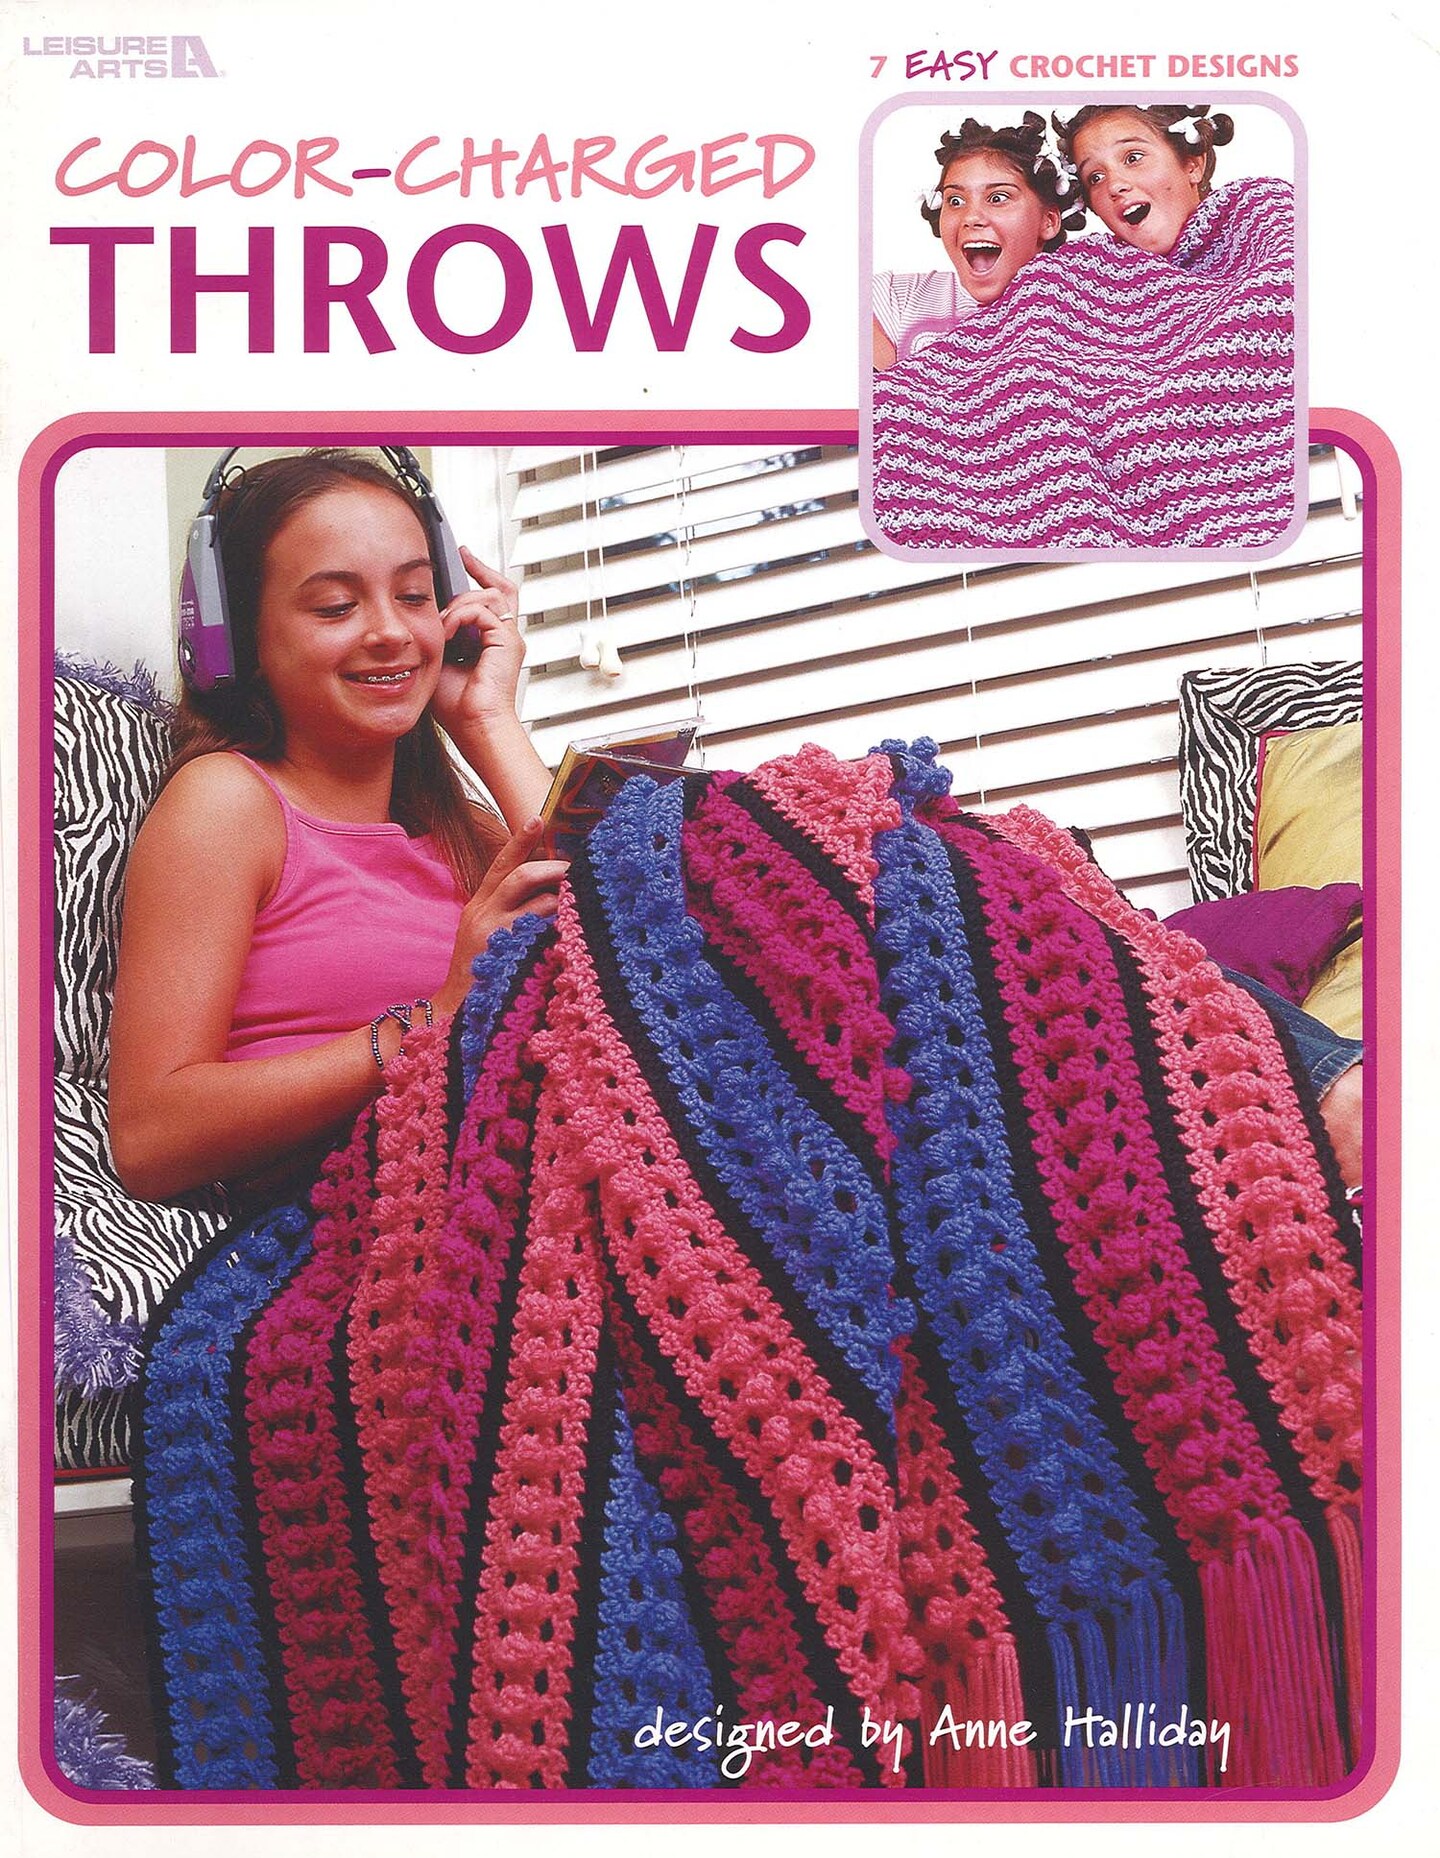 Leisure Arts Color Charged Throws Crochet Book